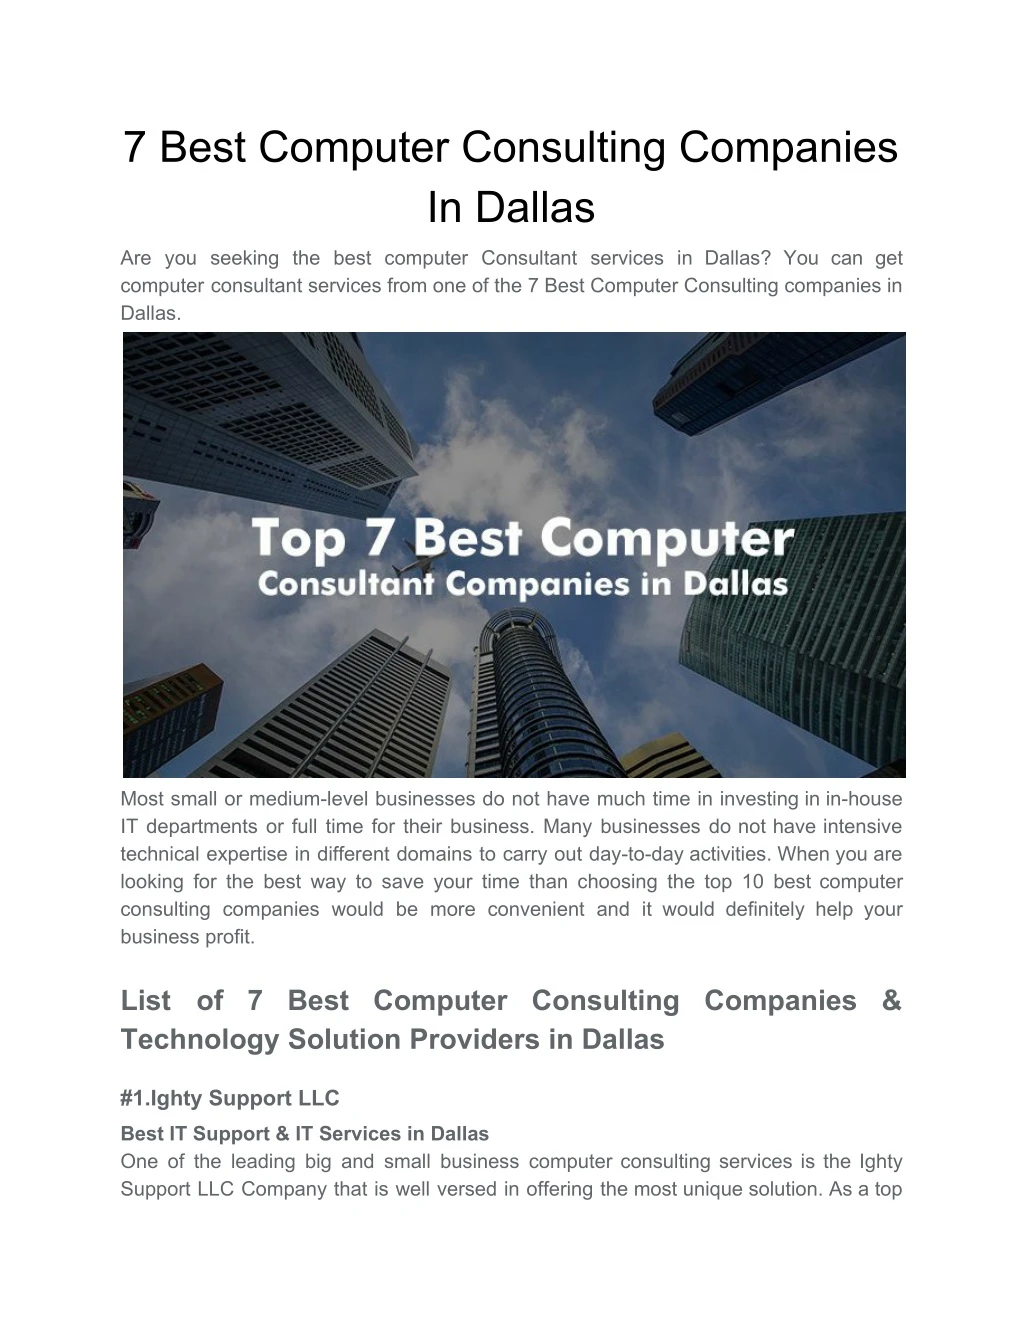 7 best computer consulting companies in dallas